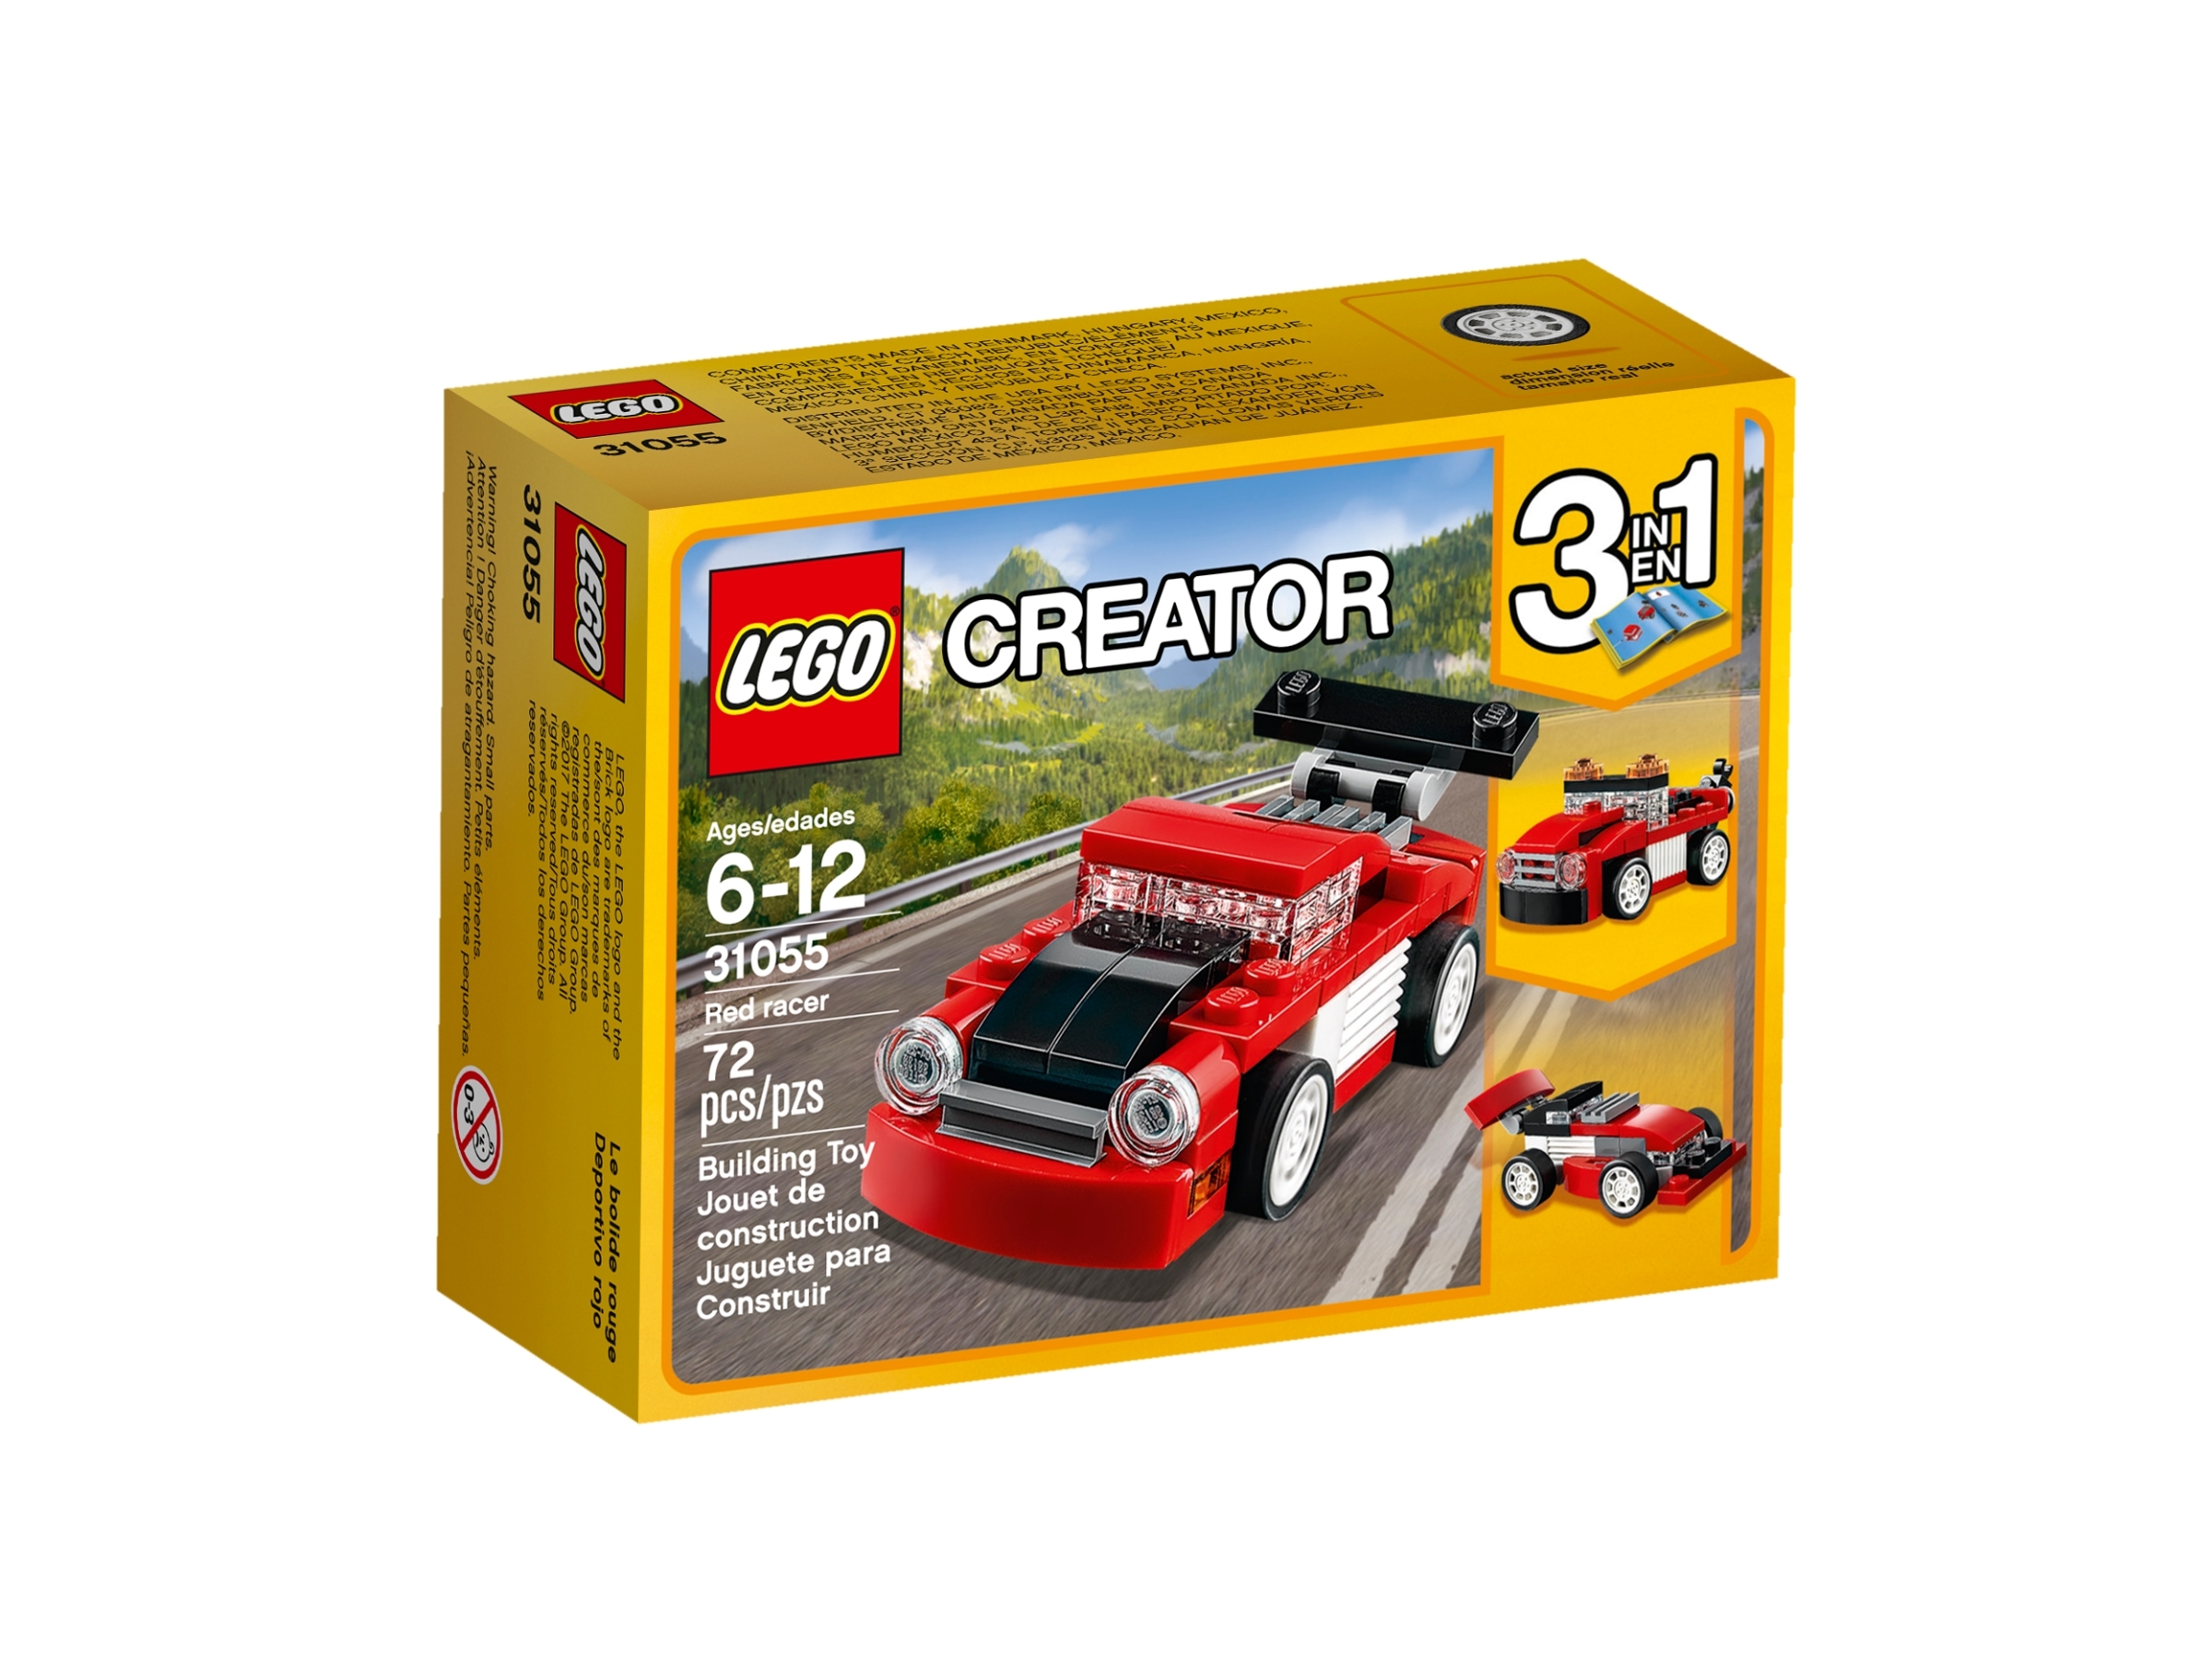 is rulle Derbeville test Red racer 31055 | Creator 3-in-1 | Buy online at the Official LEGO® Shop US